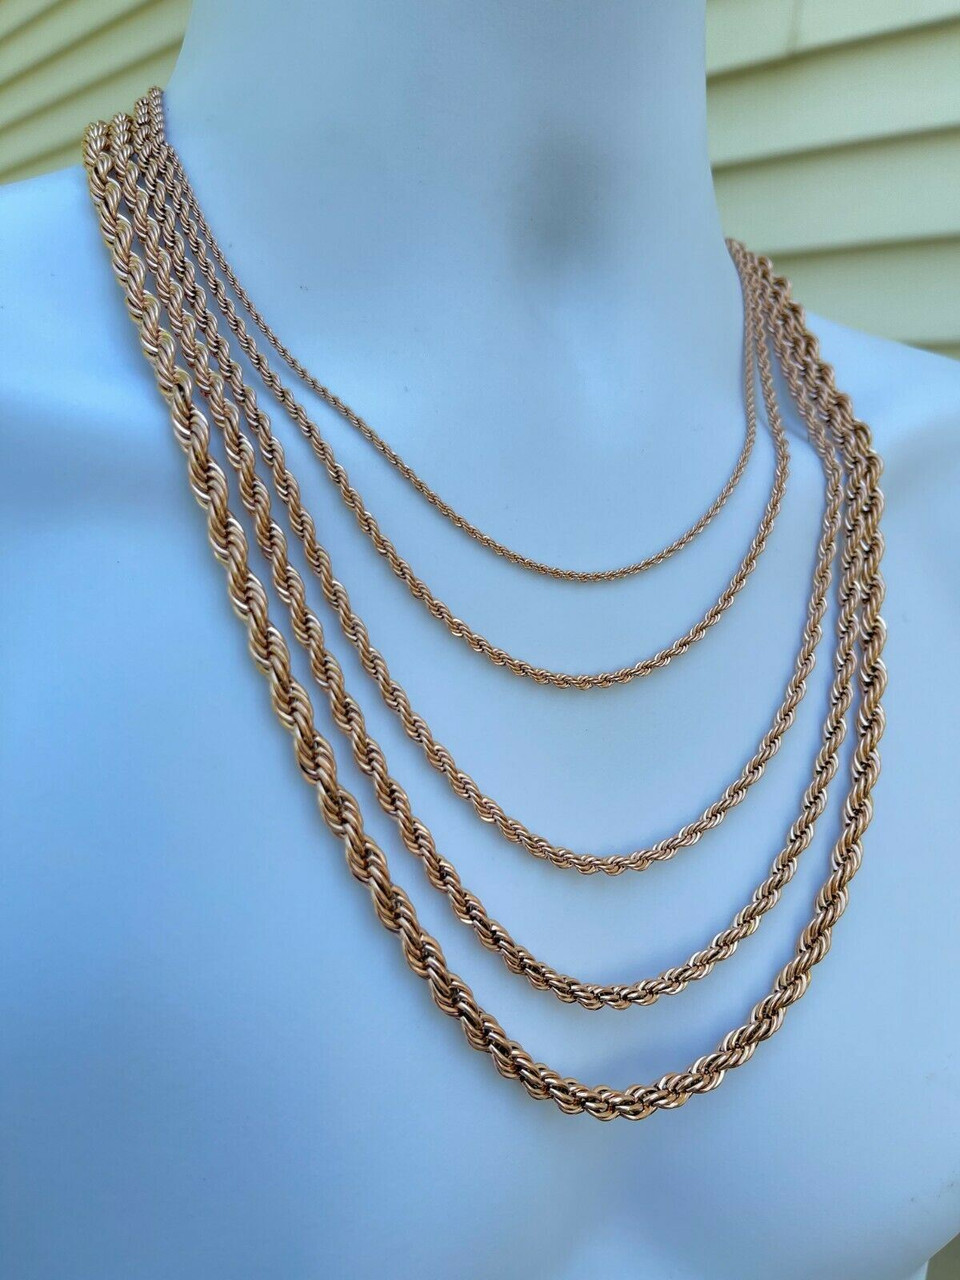 Men's Real Rope Chain Necklace 14k Rose Gold Over Stainless Steel 2mm-6mm  18-30